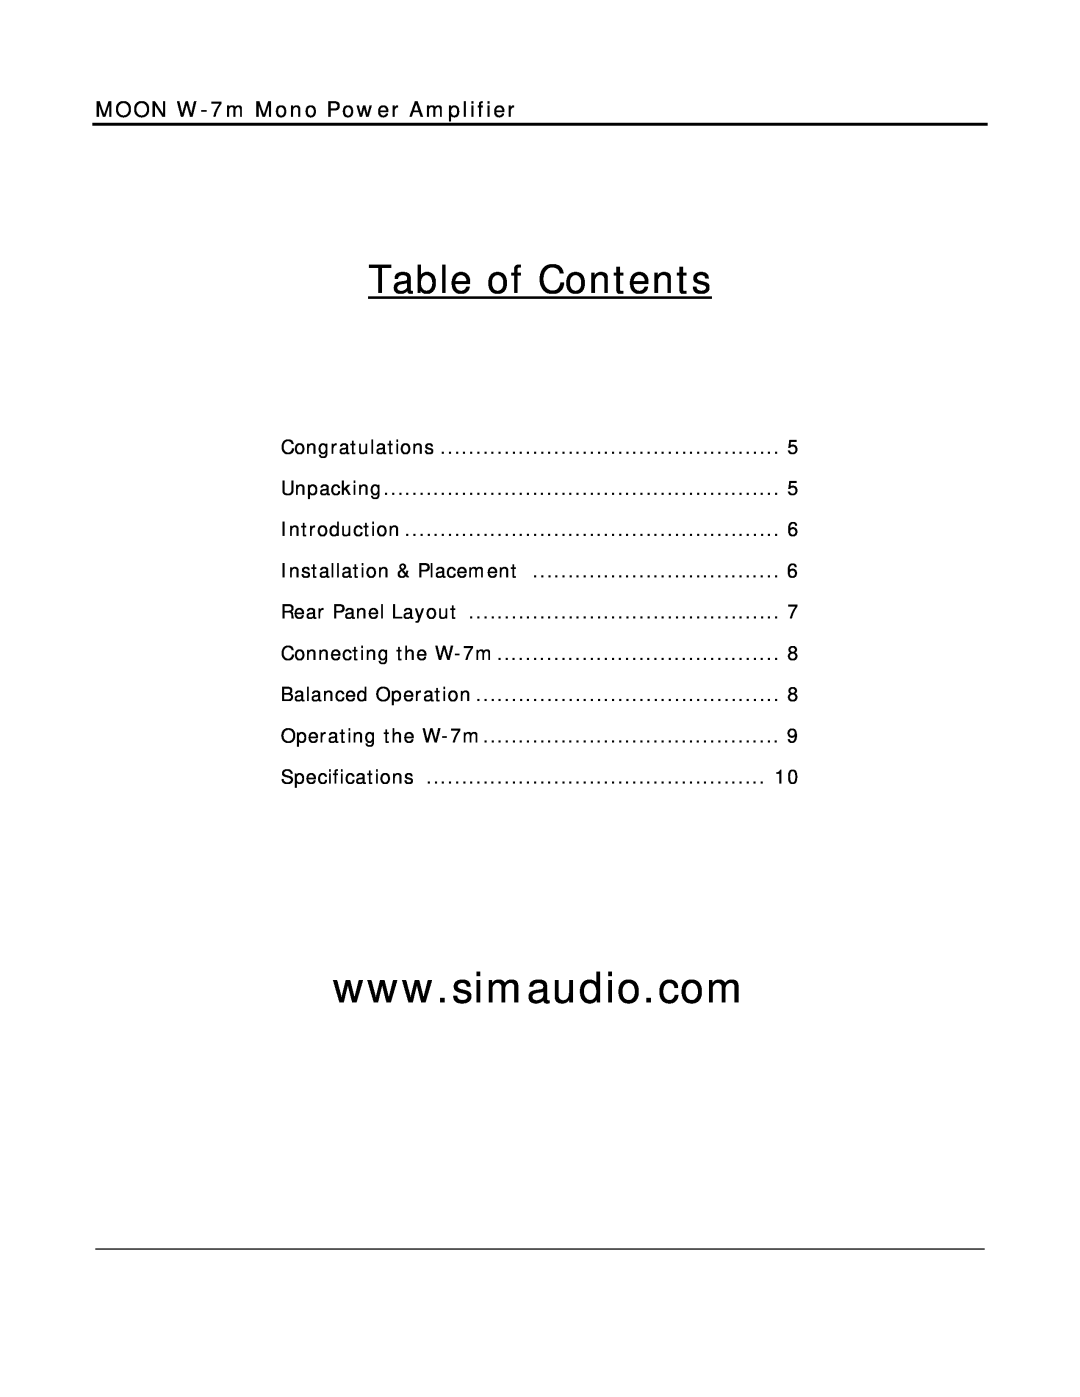 Simaudio owner manual Table of Contents, MOON W-7mMono Power Amplifier 